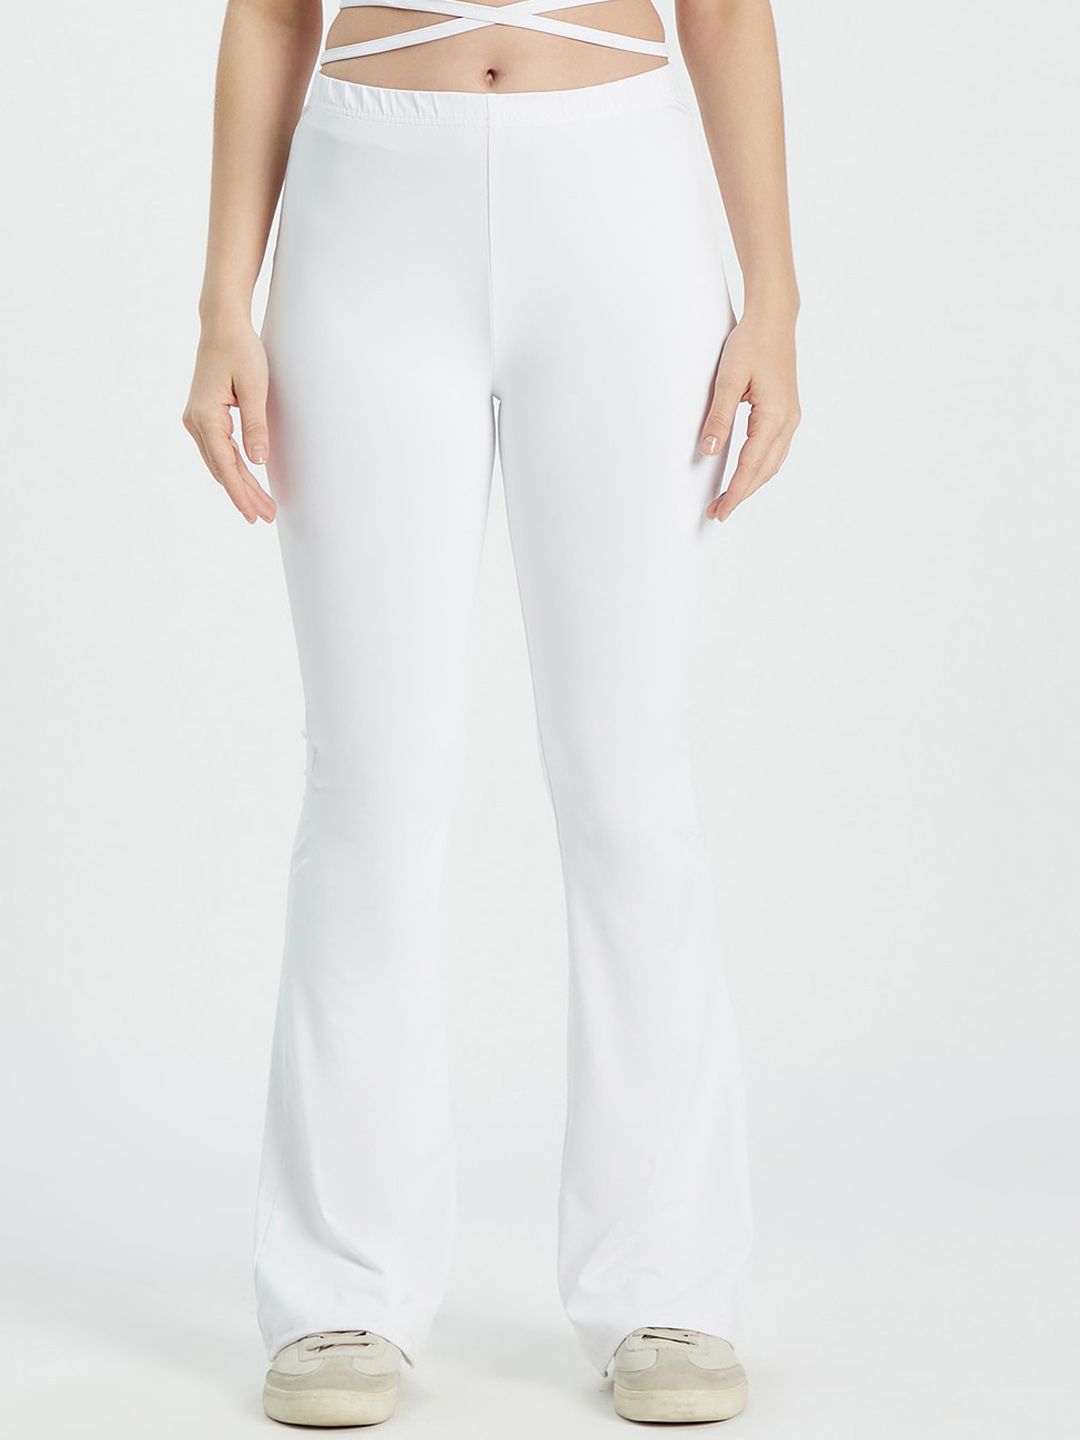 EDRIO White Slim Fit Easy Wash Bootcut Trousers Price in India